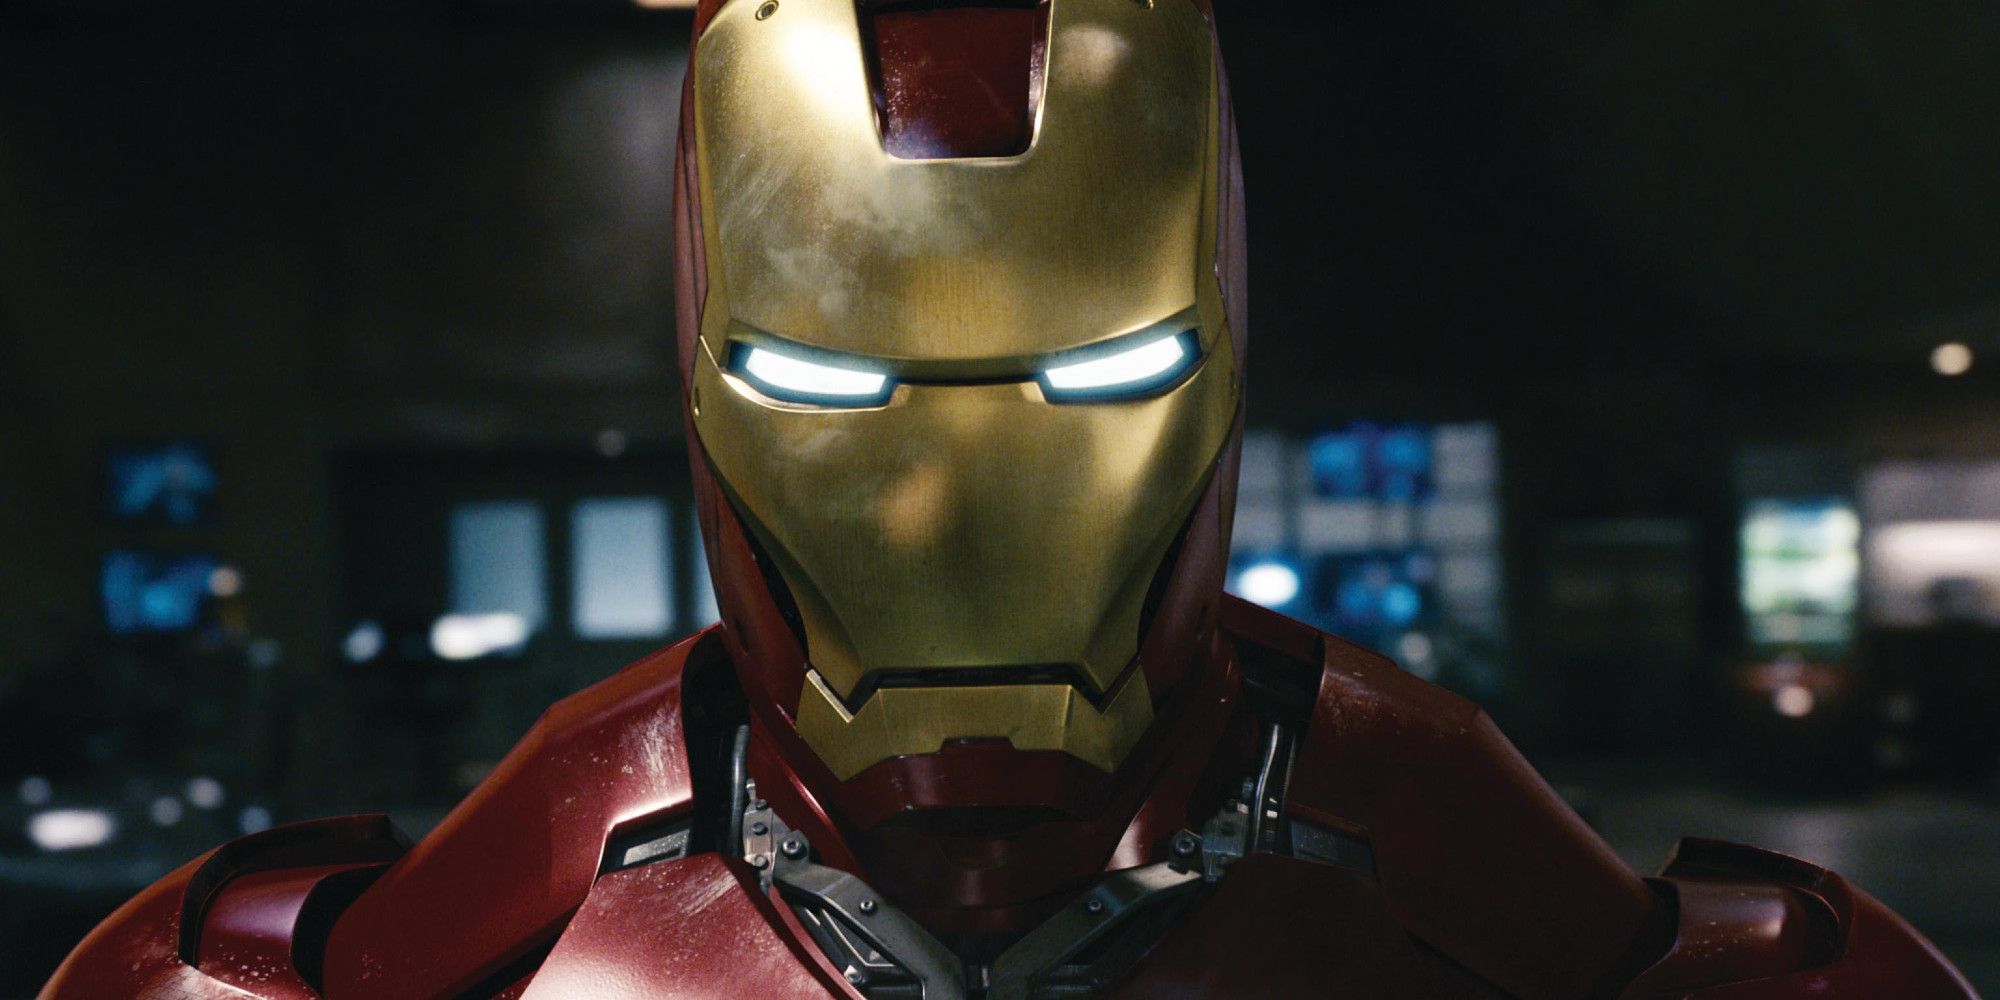 Robert Downey Jr. suited up in the Mark III armor in 2008's Iron Man.